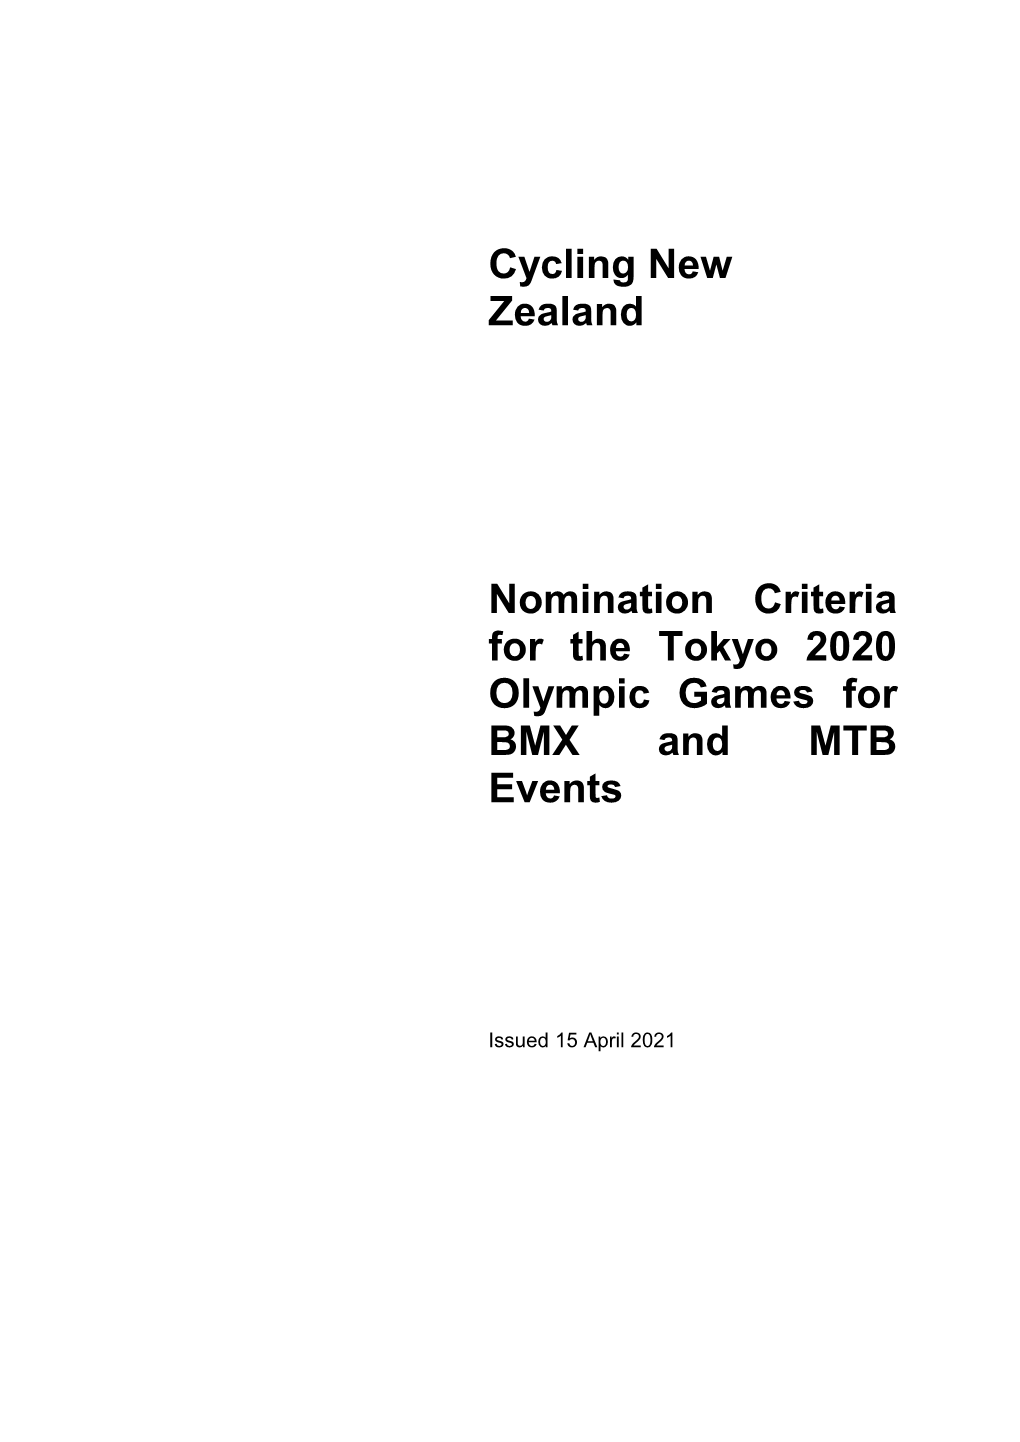 Cycling New Zealand Nomination Criteria for the Tokyo 2020 Olympic Games for BMX and MTB Events